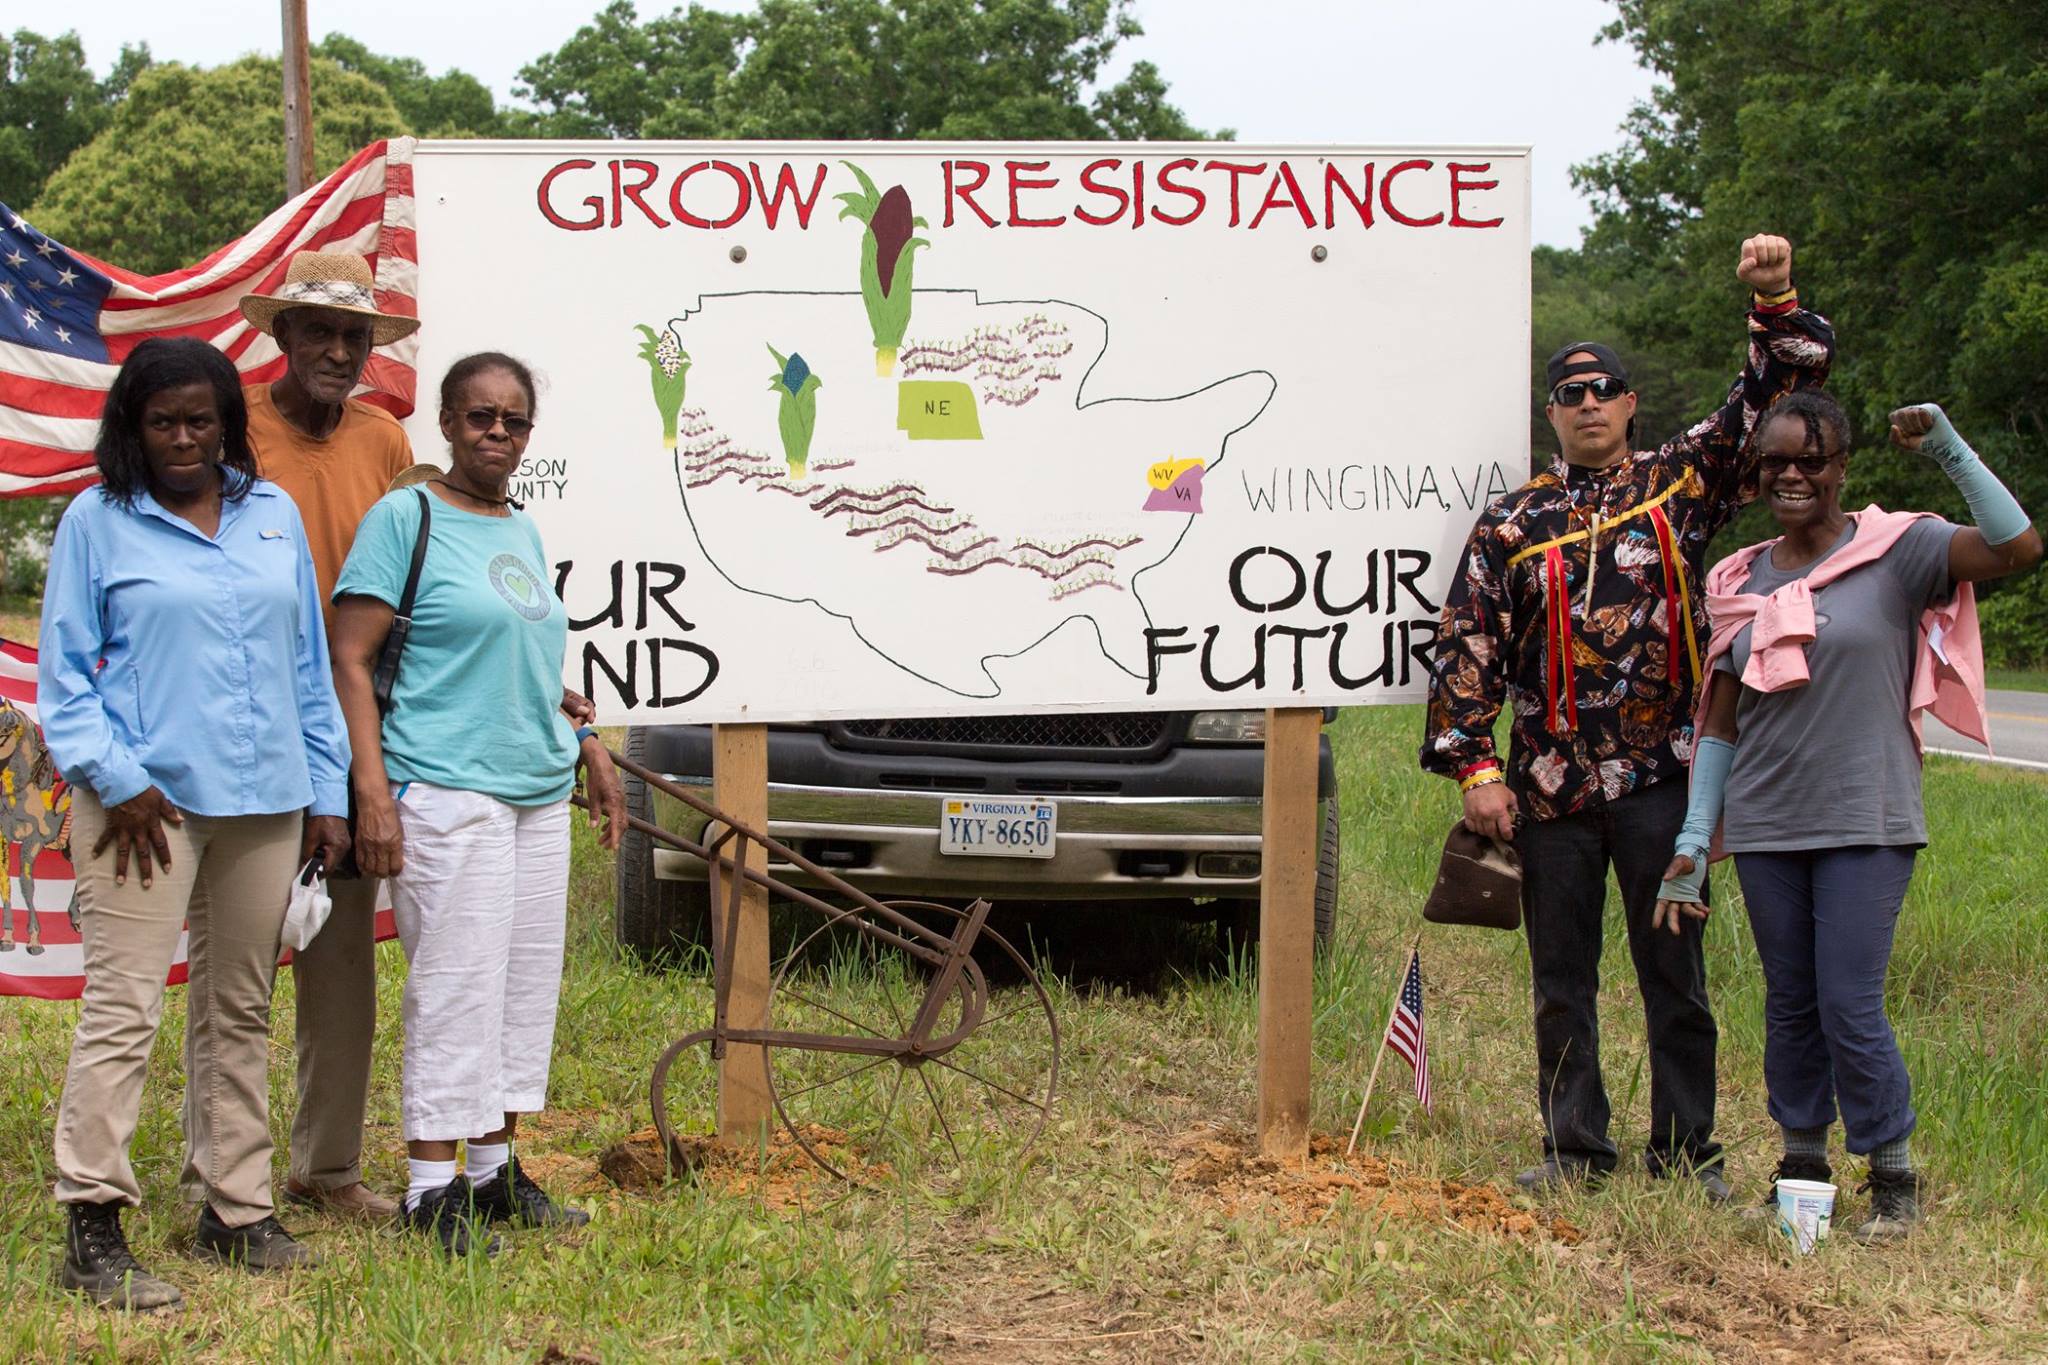 The Cowboy and Indian Alliance that formed to defeat Keystone XL joined the Bold Alliance and Oil Change International to plant "Seeds of Resistance" Ponca sacred corn on land in Virginia and W. Virginia that lies in the paths of the Atlantic Coast and Mountain Valley fracked gas pipelines in 2016. (Photo: Peter Aaslestad)